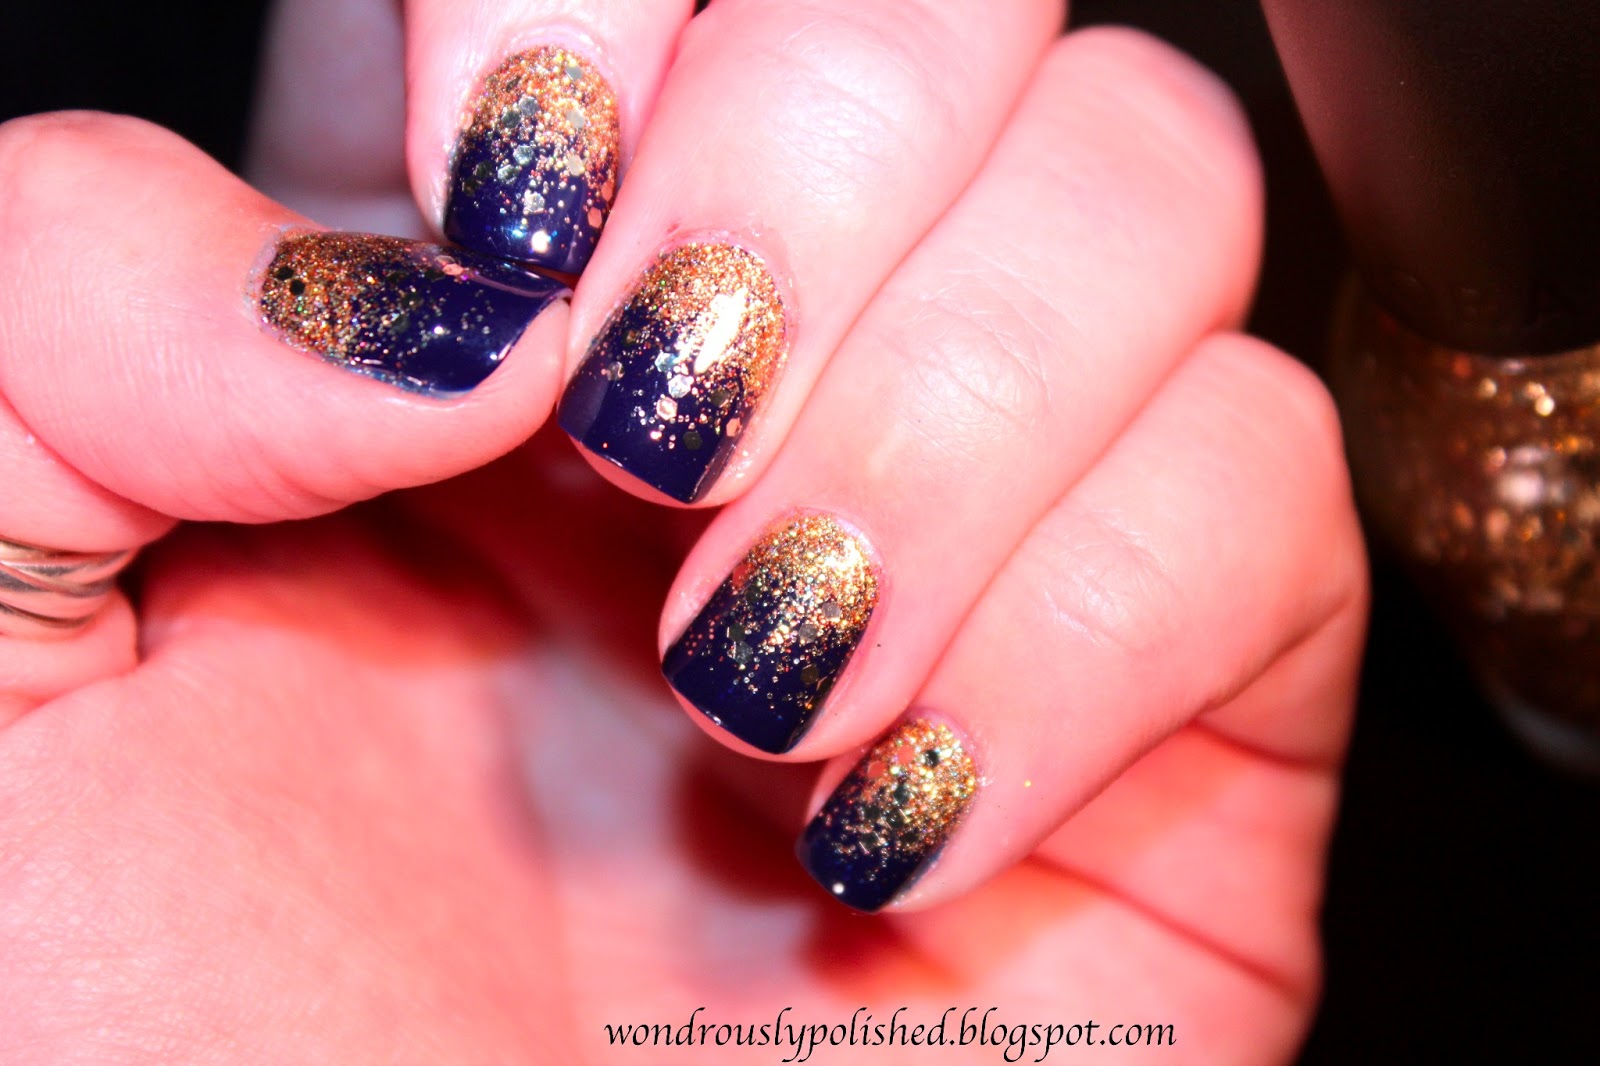 9. Butter London Royal Navy - wide 7